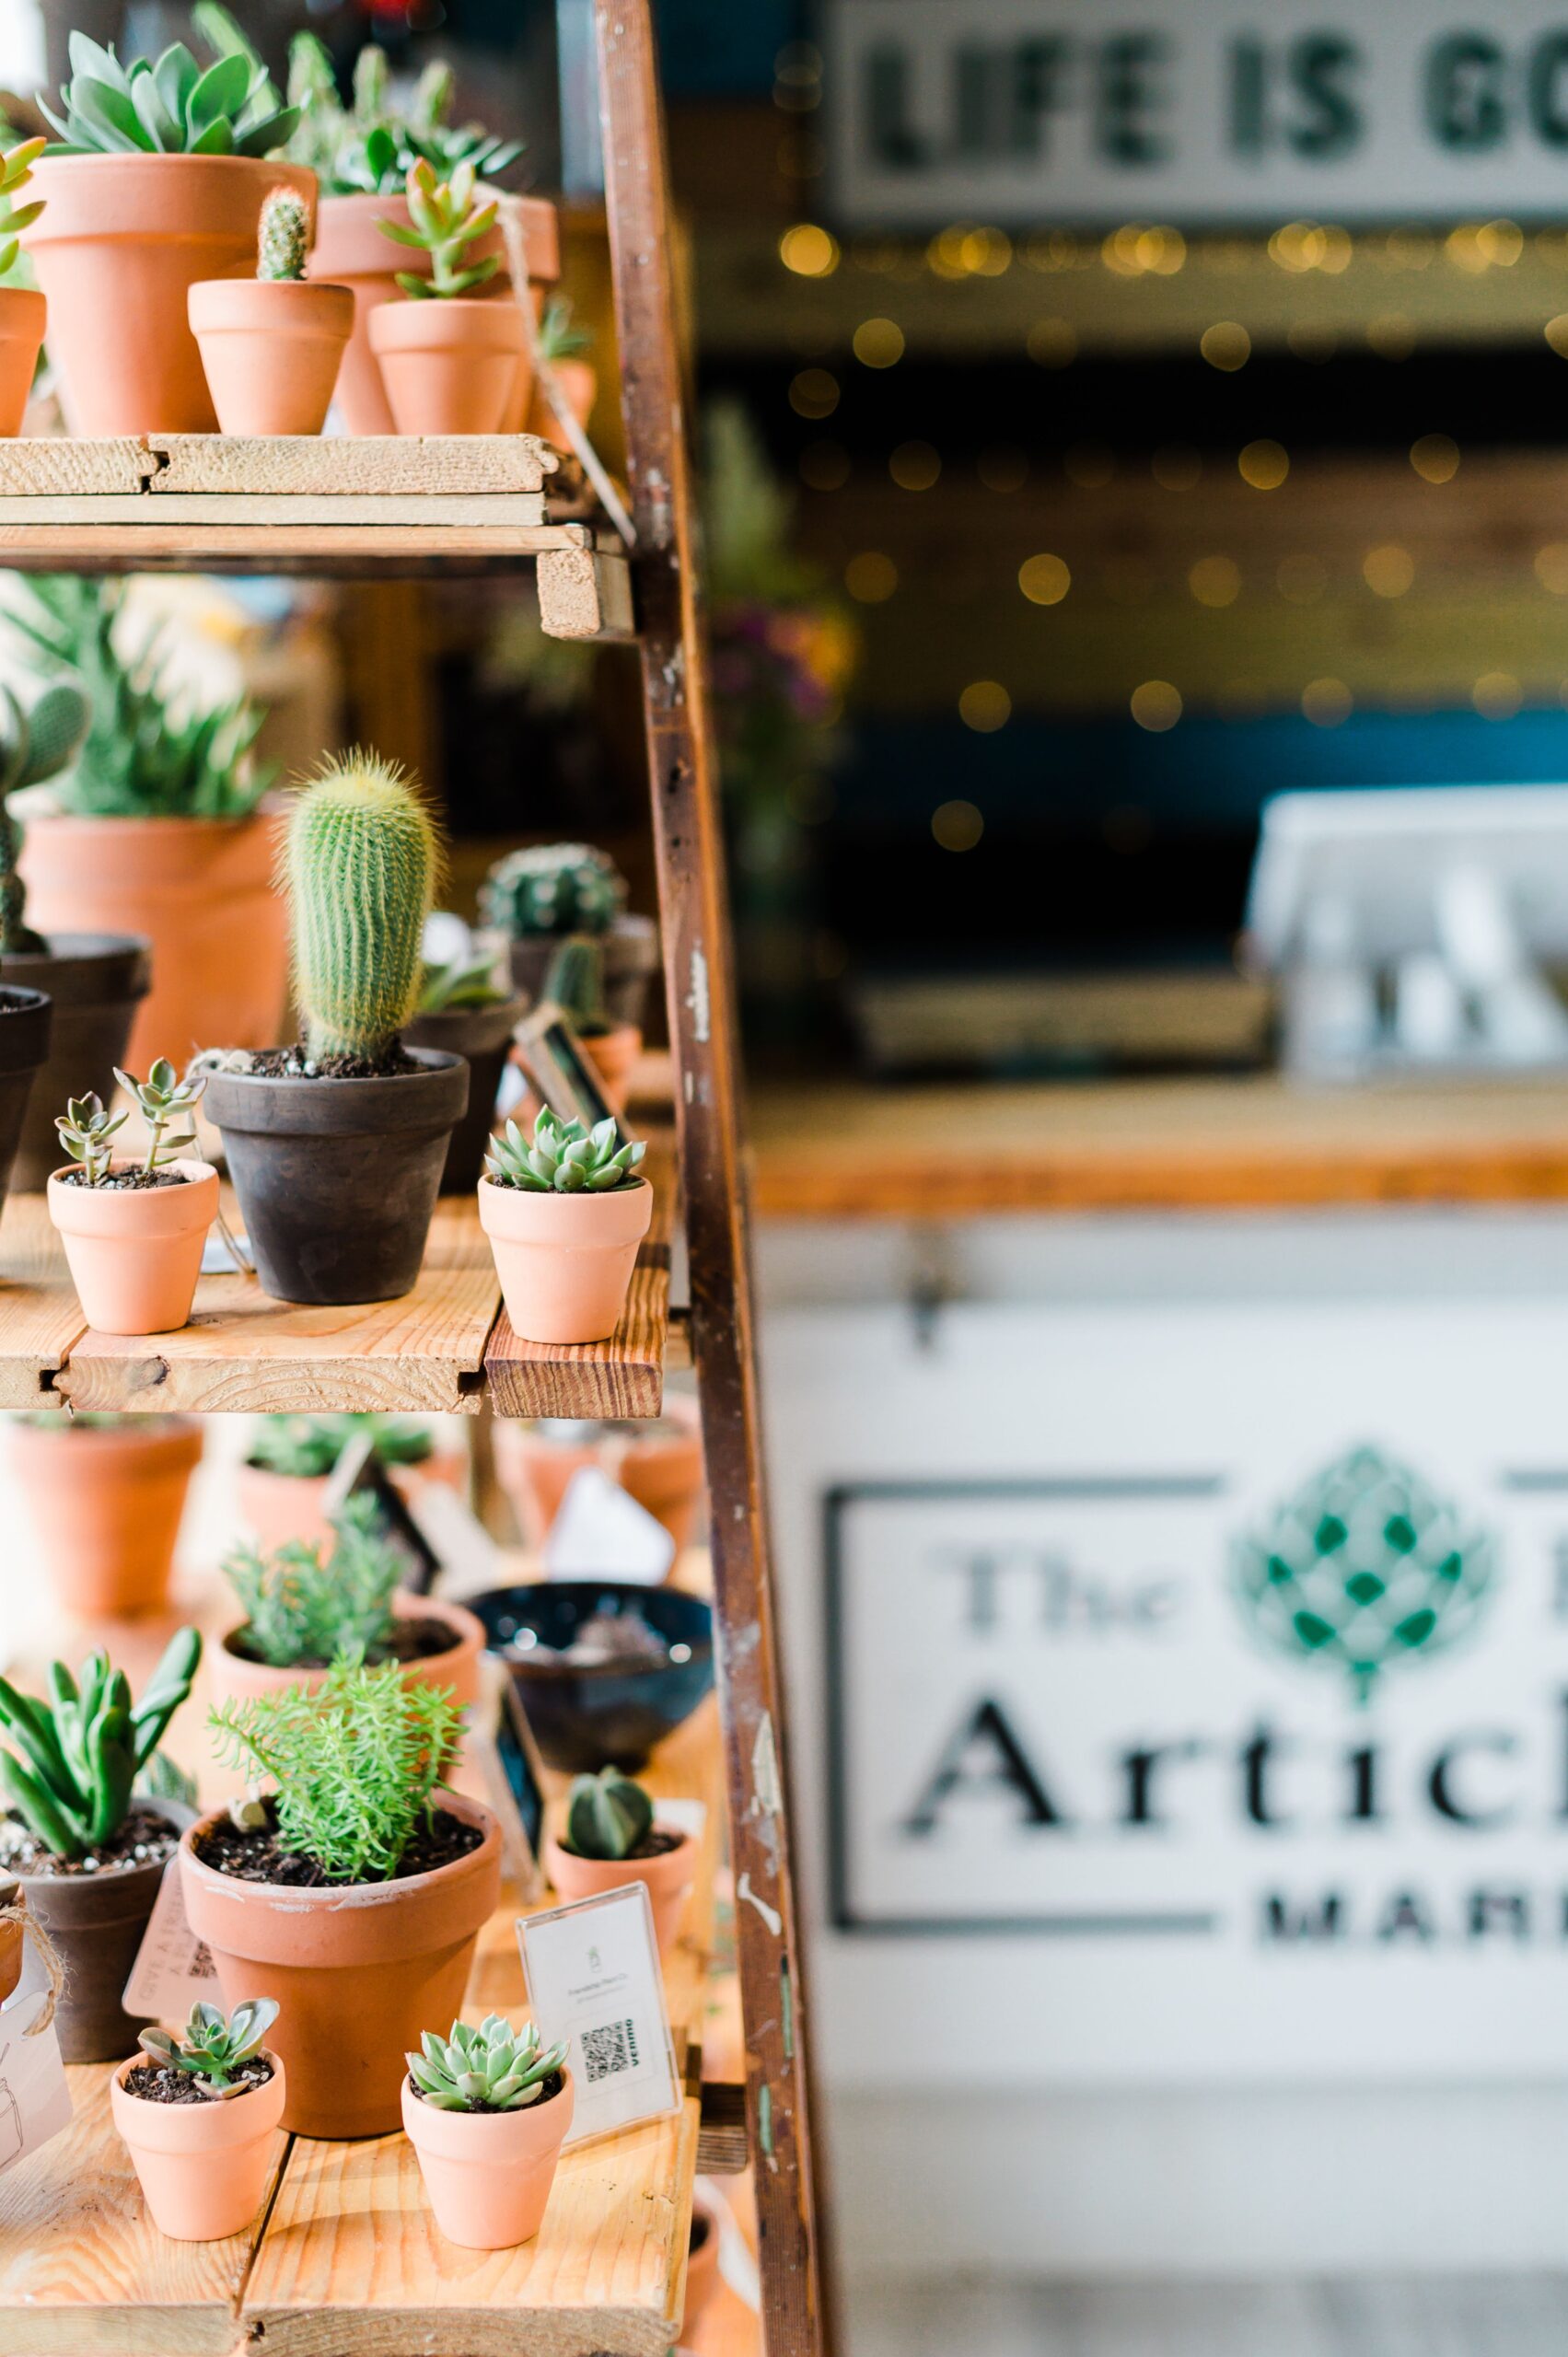 Shelves of succulents stand in front of The Budding Artichoke counter.